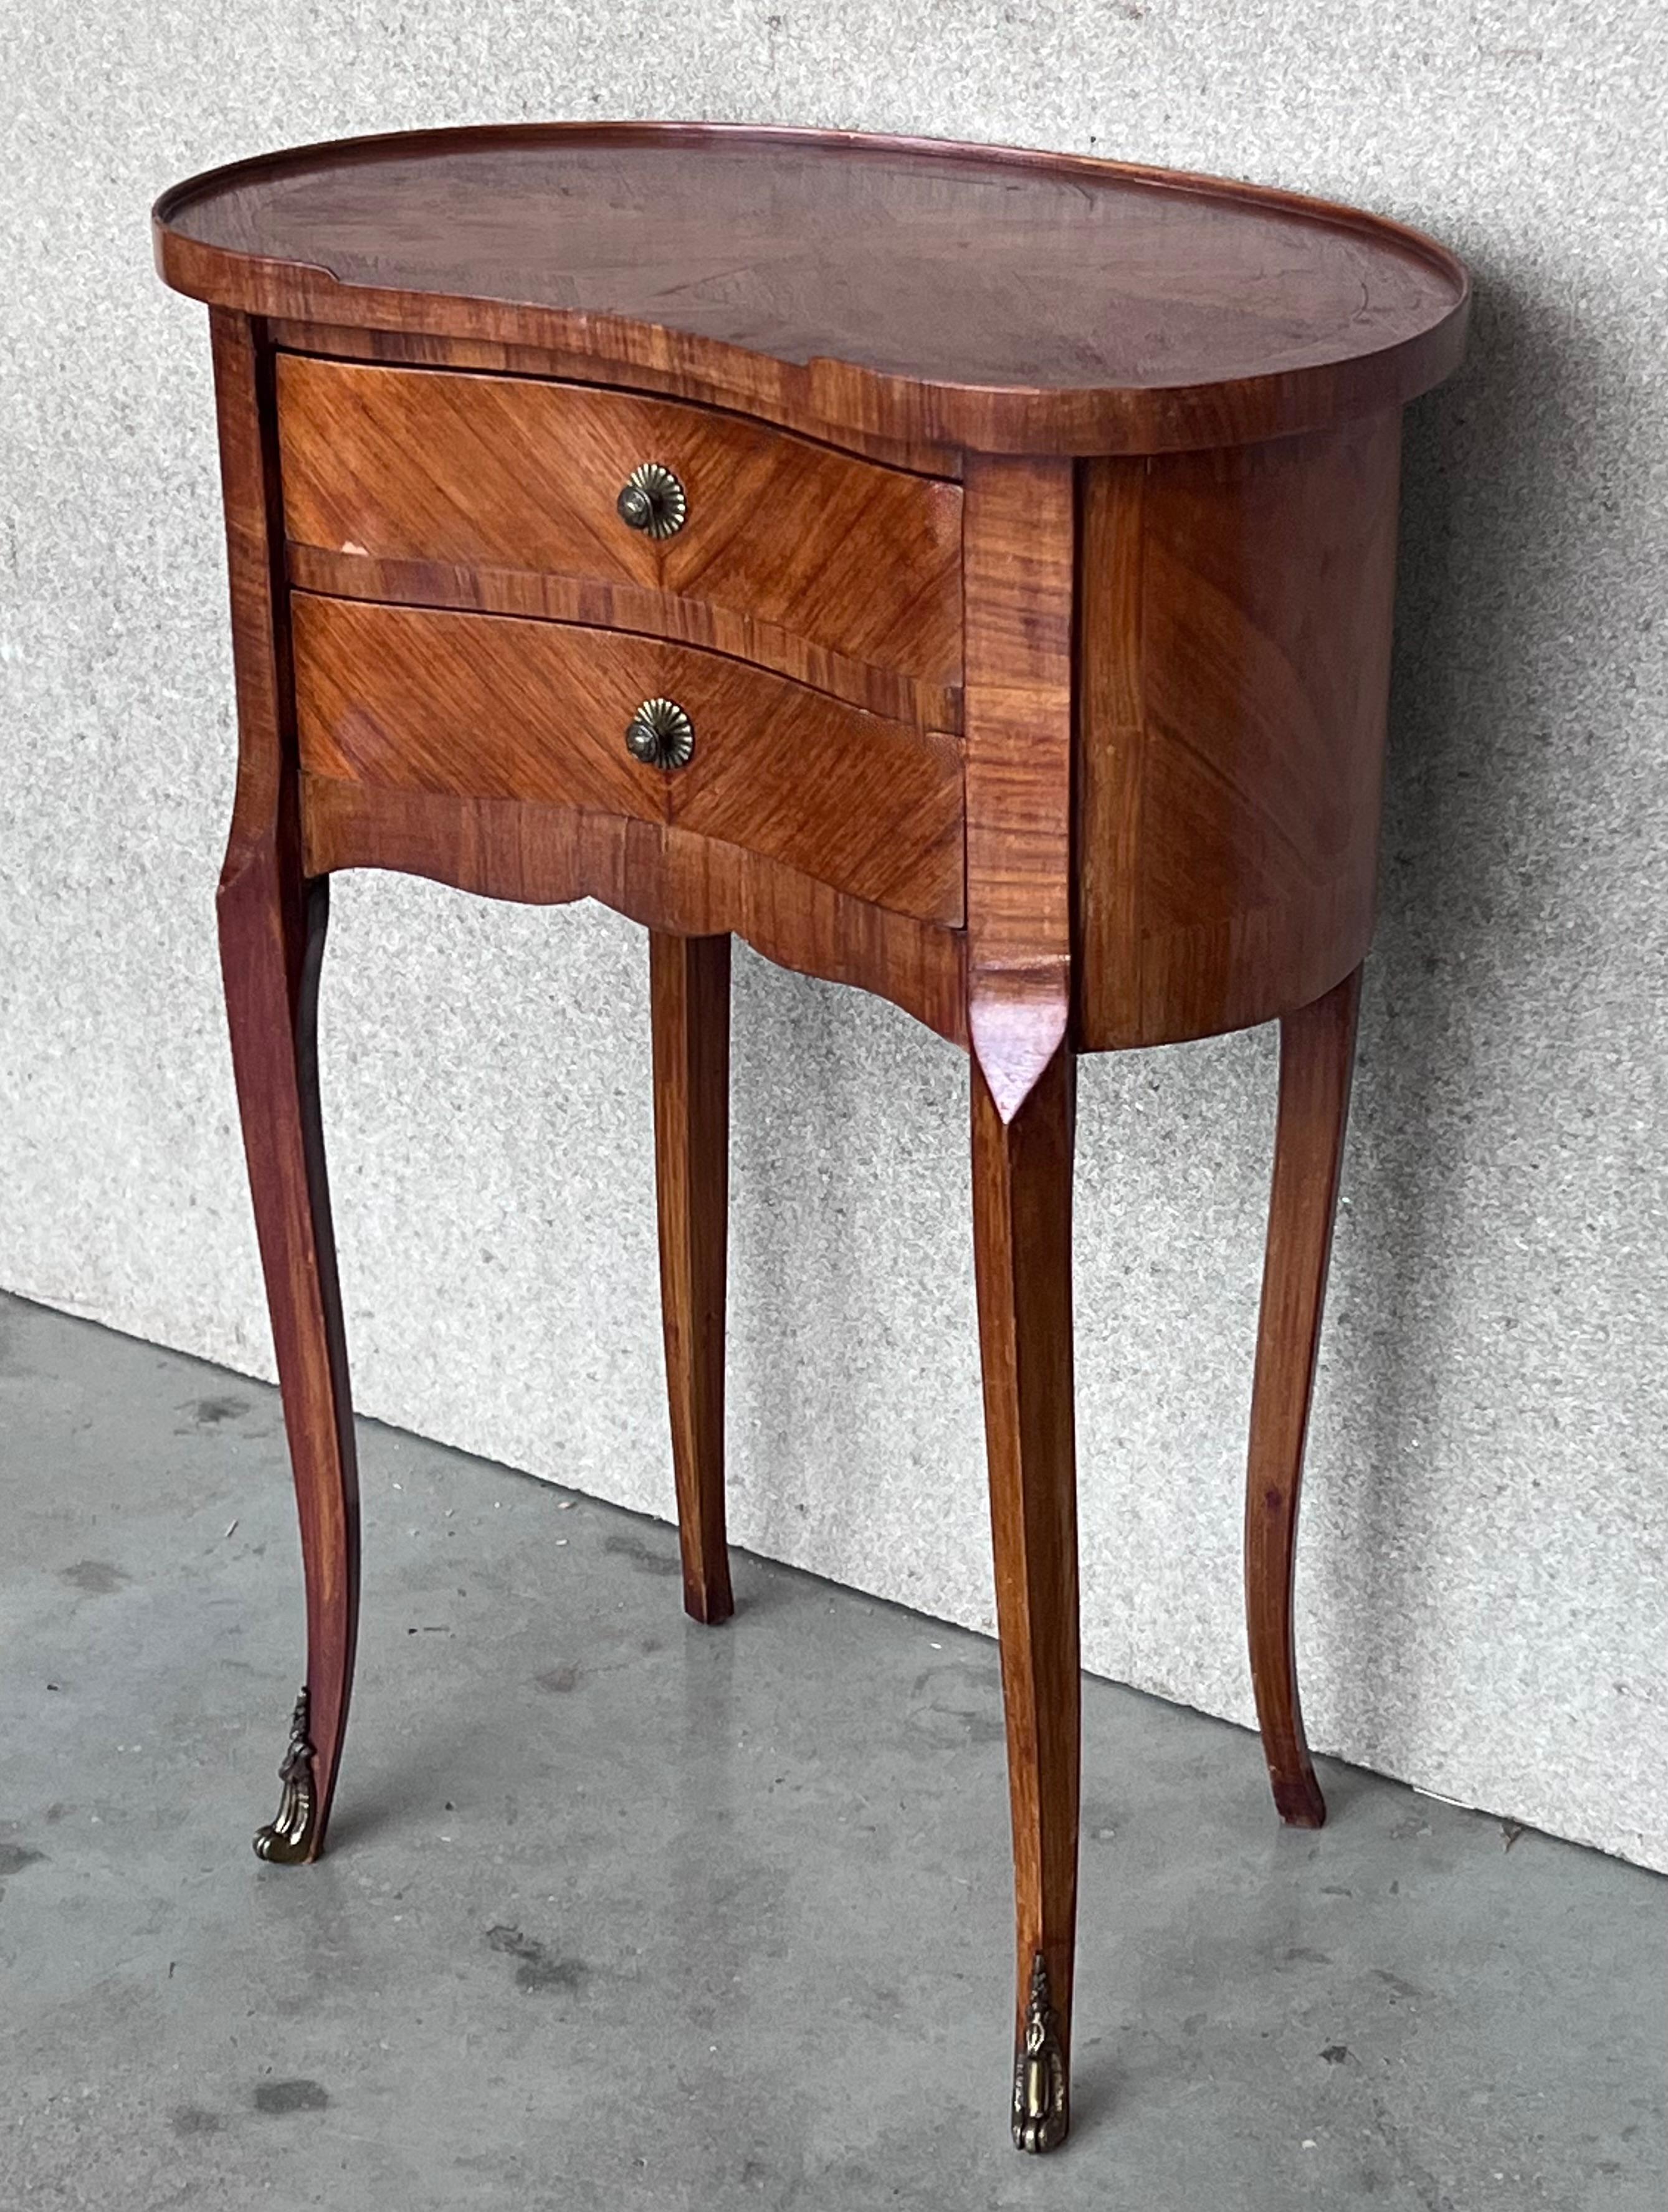 20th century pair of walnut nightstands with kidney shape and two drawers.